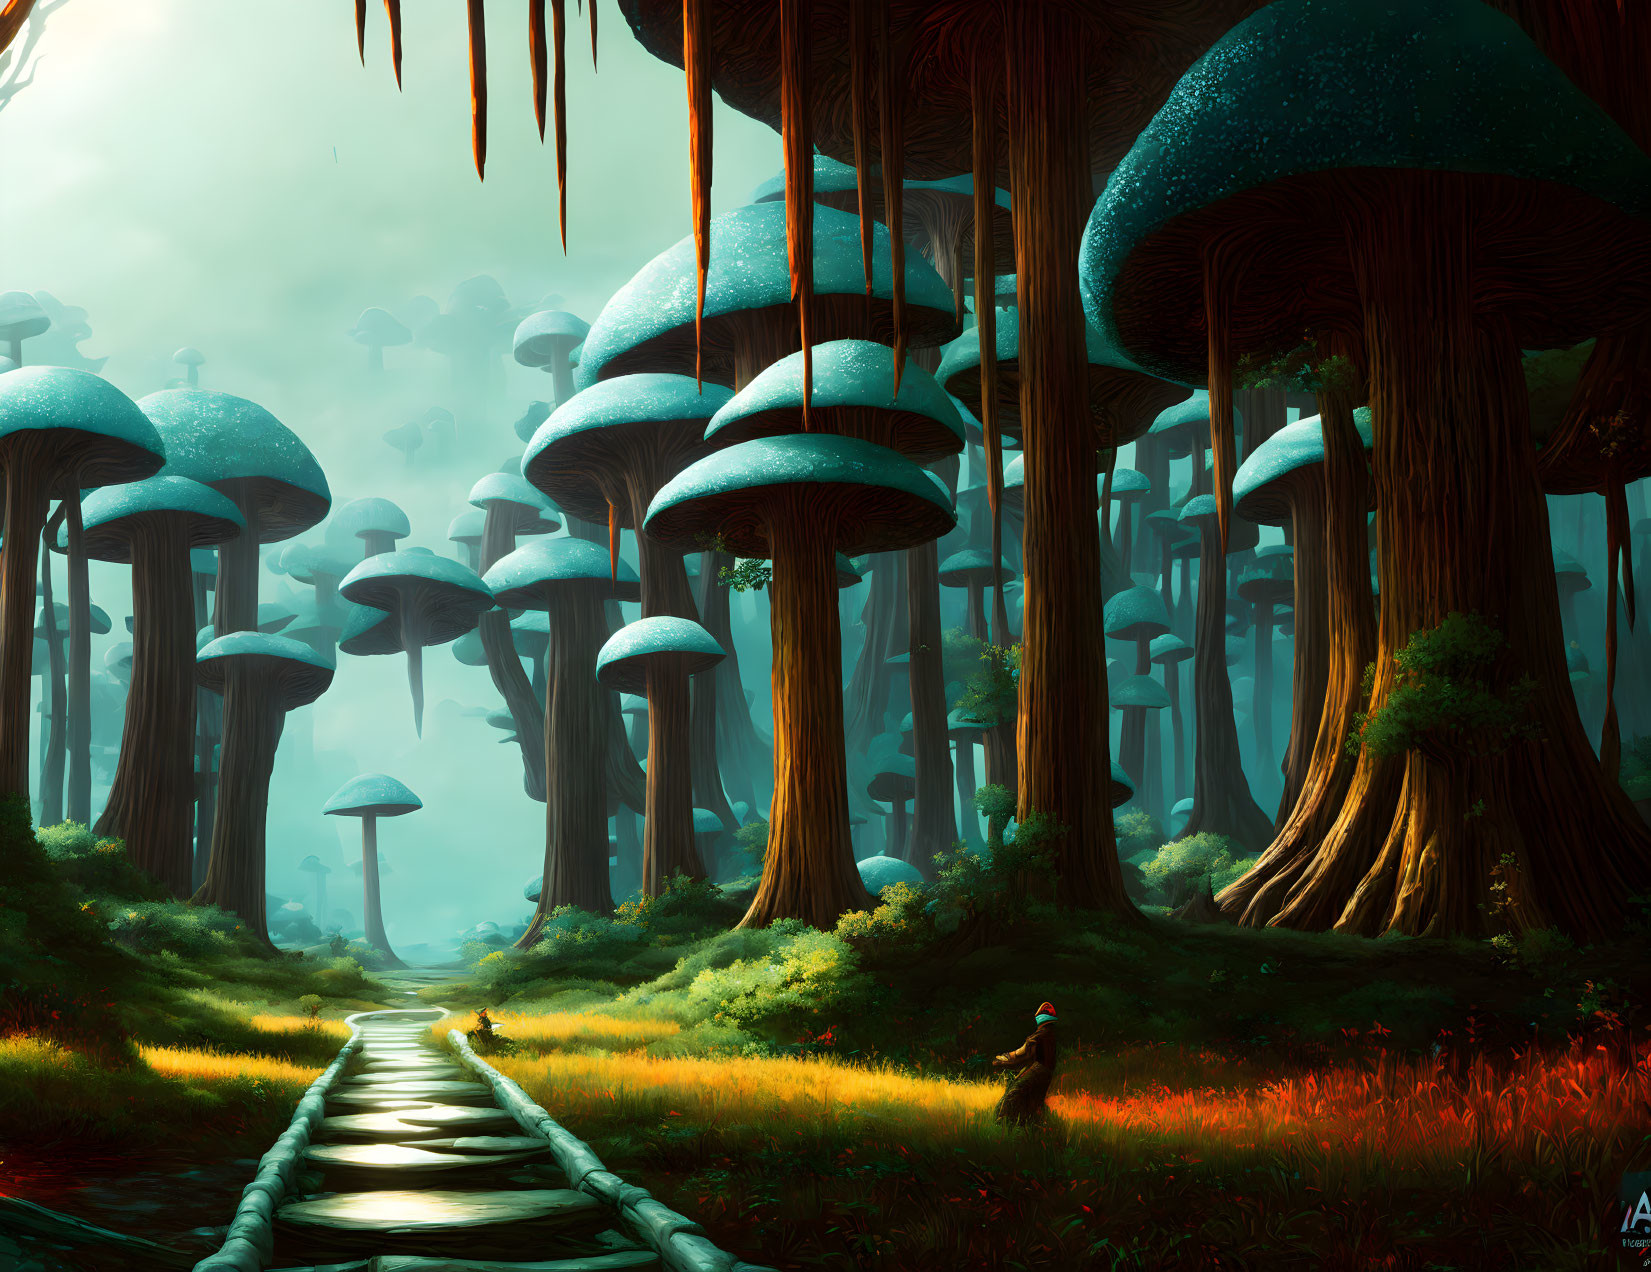 Enormous Mushroom Trees in Fantastical Forest with Wooden Walkway